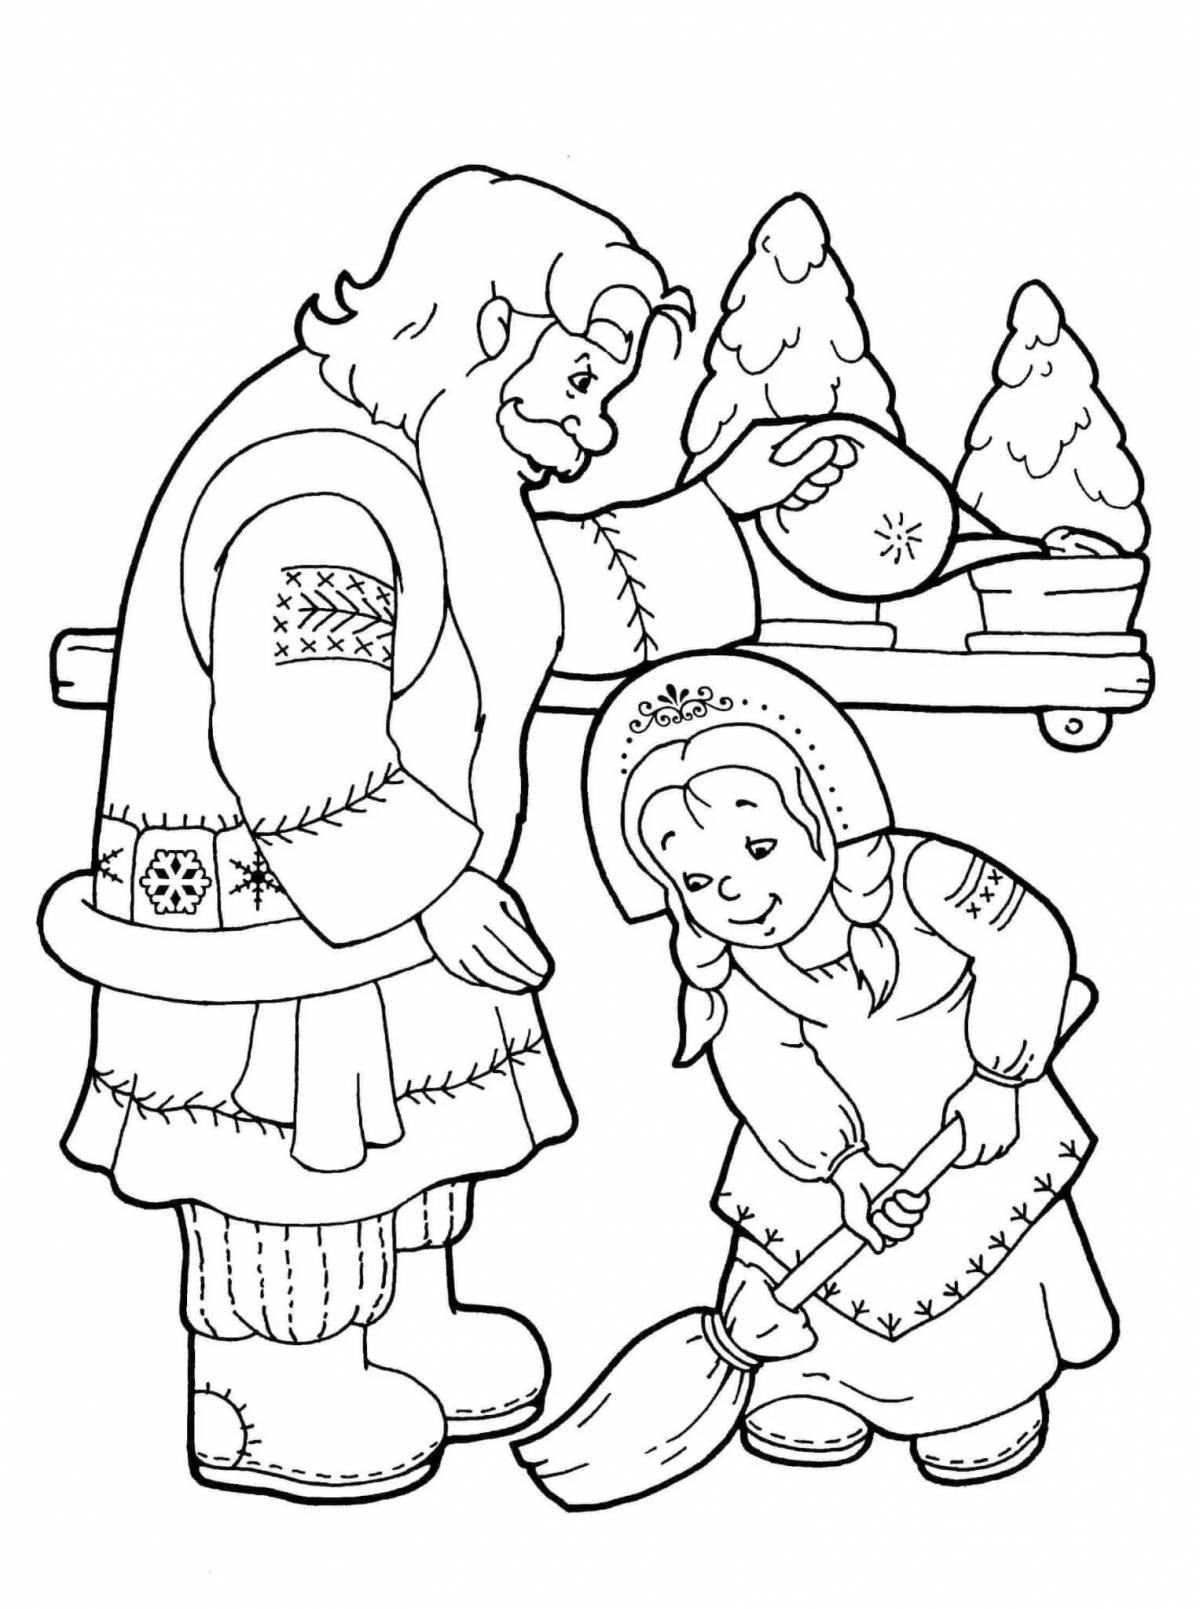 Cute coloring Moroz Ivanovich needlewoman and sloth